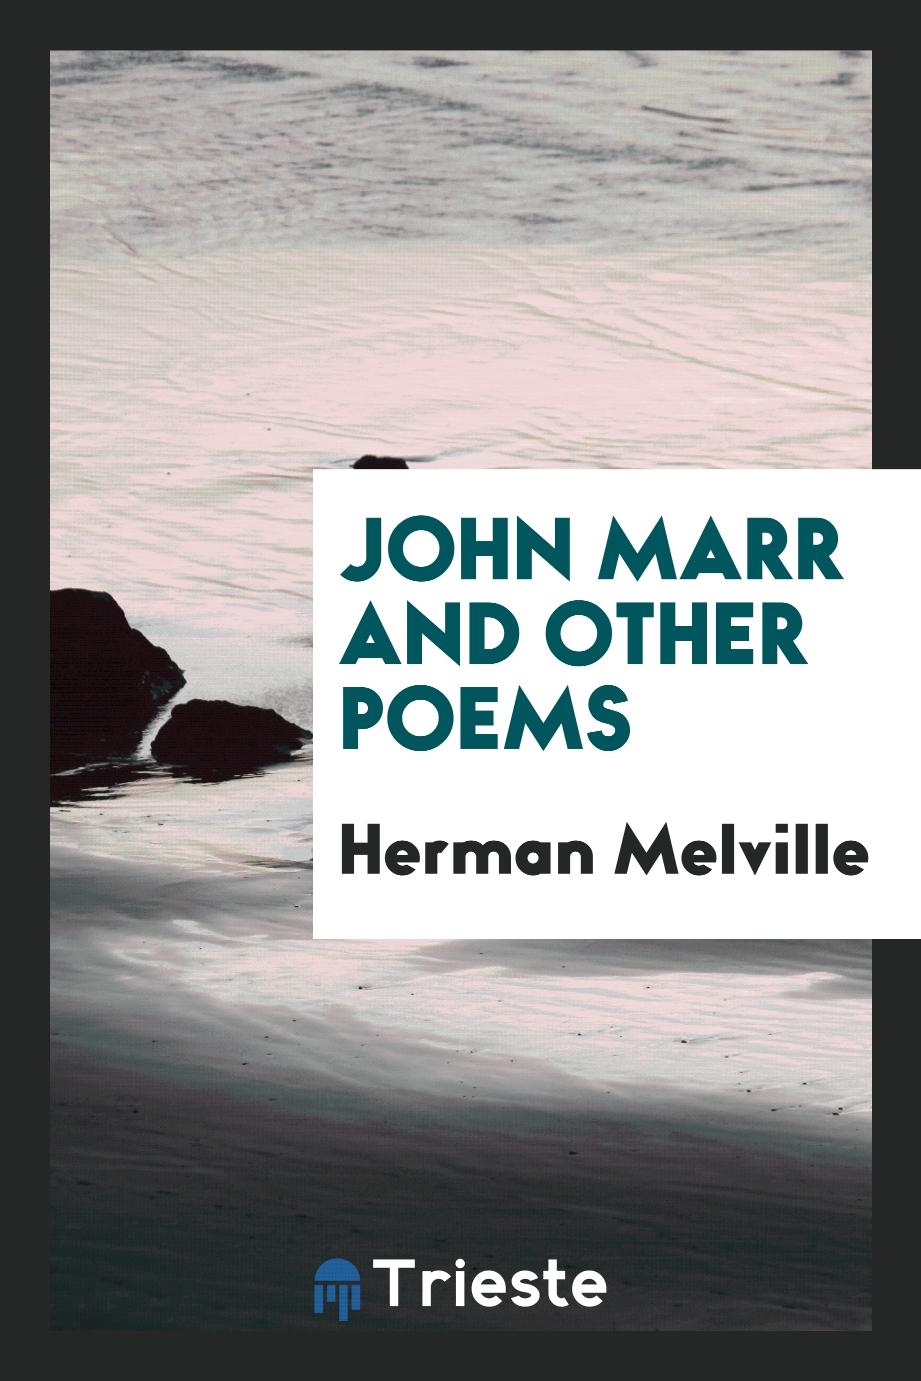 John Marr and other poems